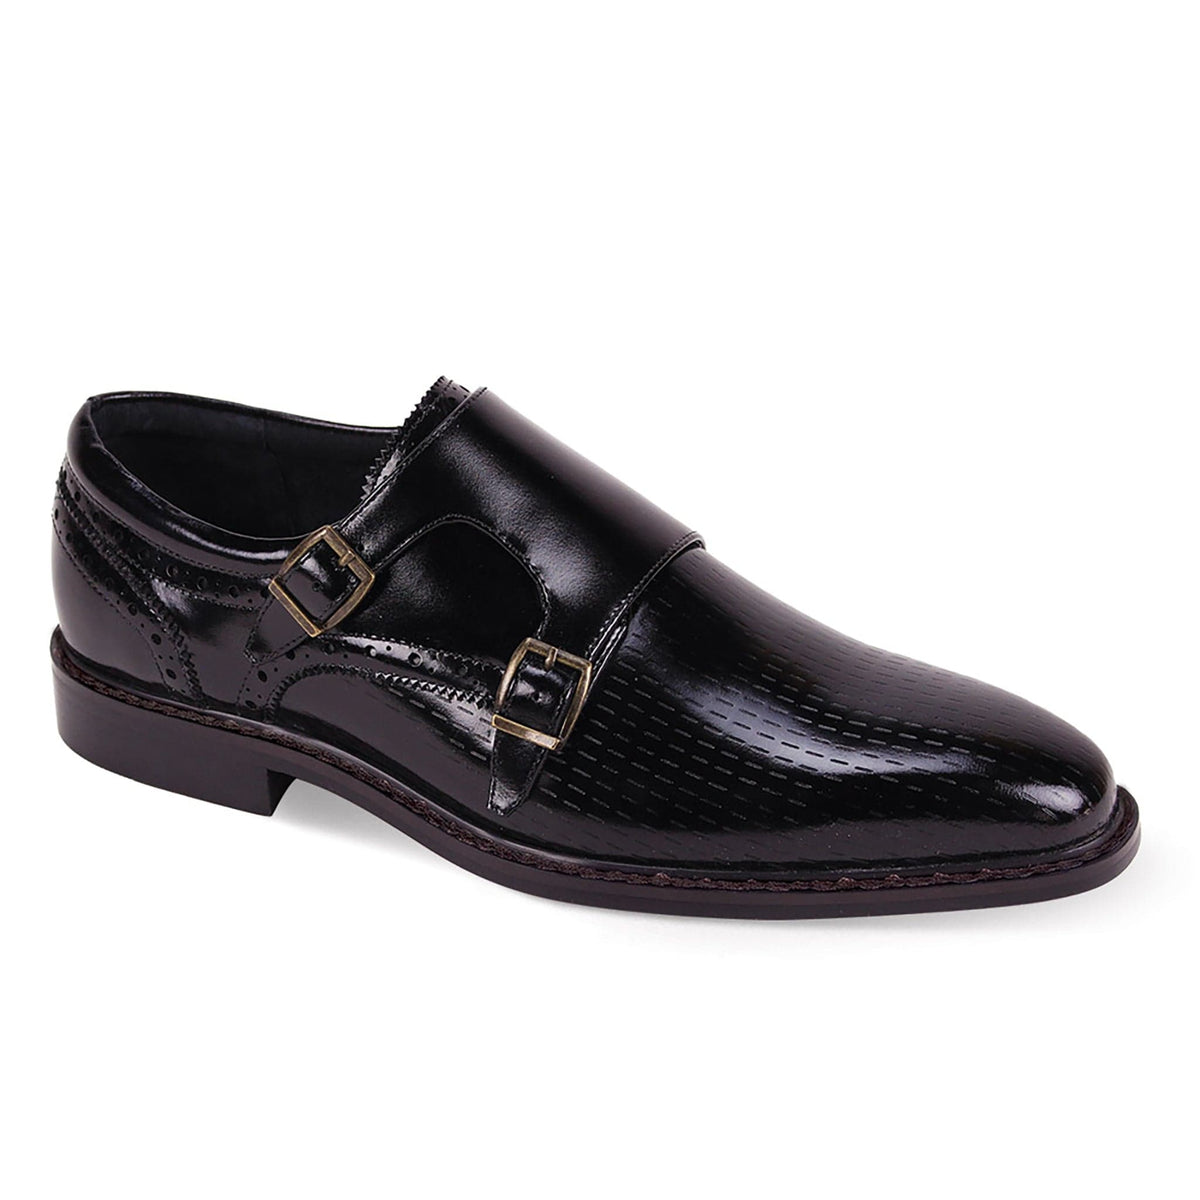 GIOVANNI LEATHER SHOES FT BLACK / 7 GIOVANNI LEATHER SHOES-ROCKY